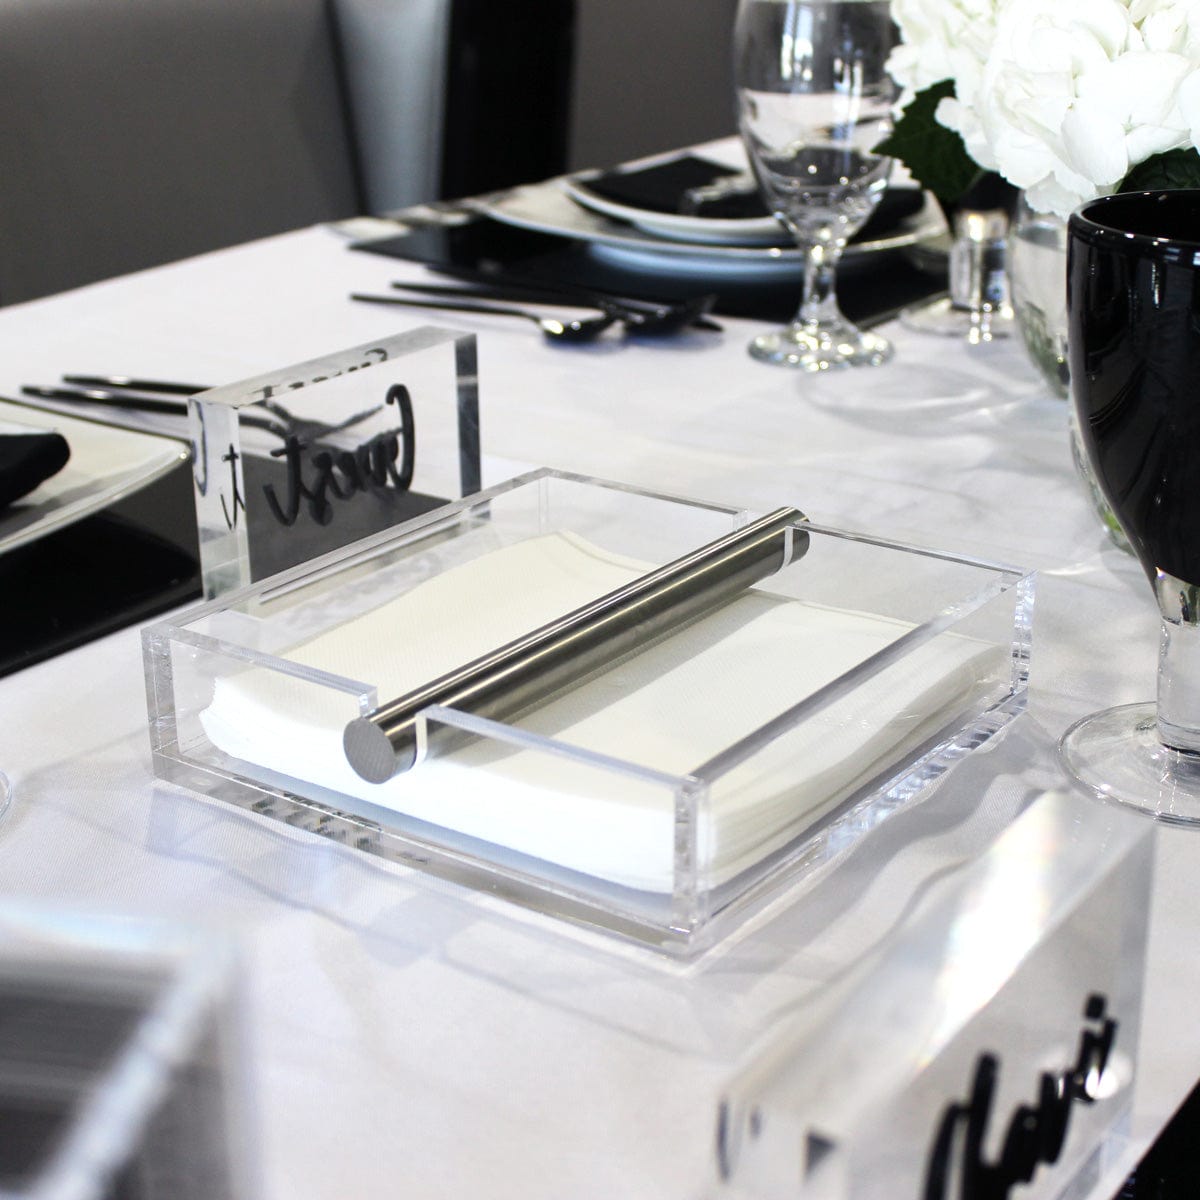 Black & White Tablescape - Waterdale Collection